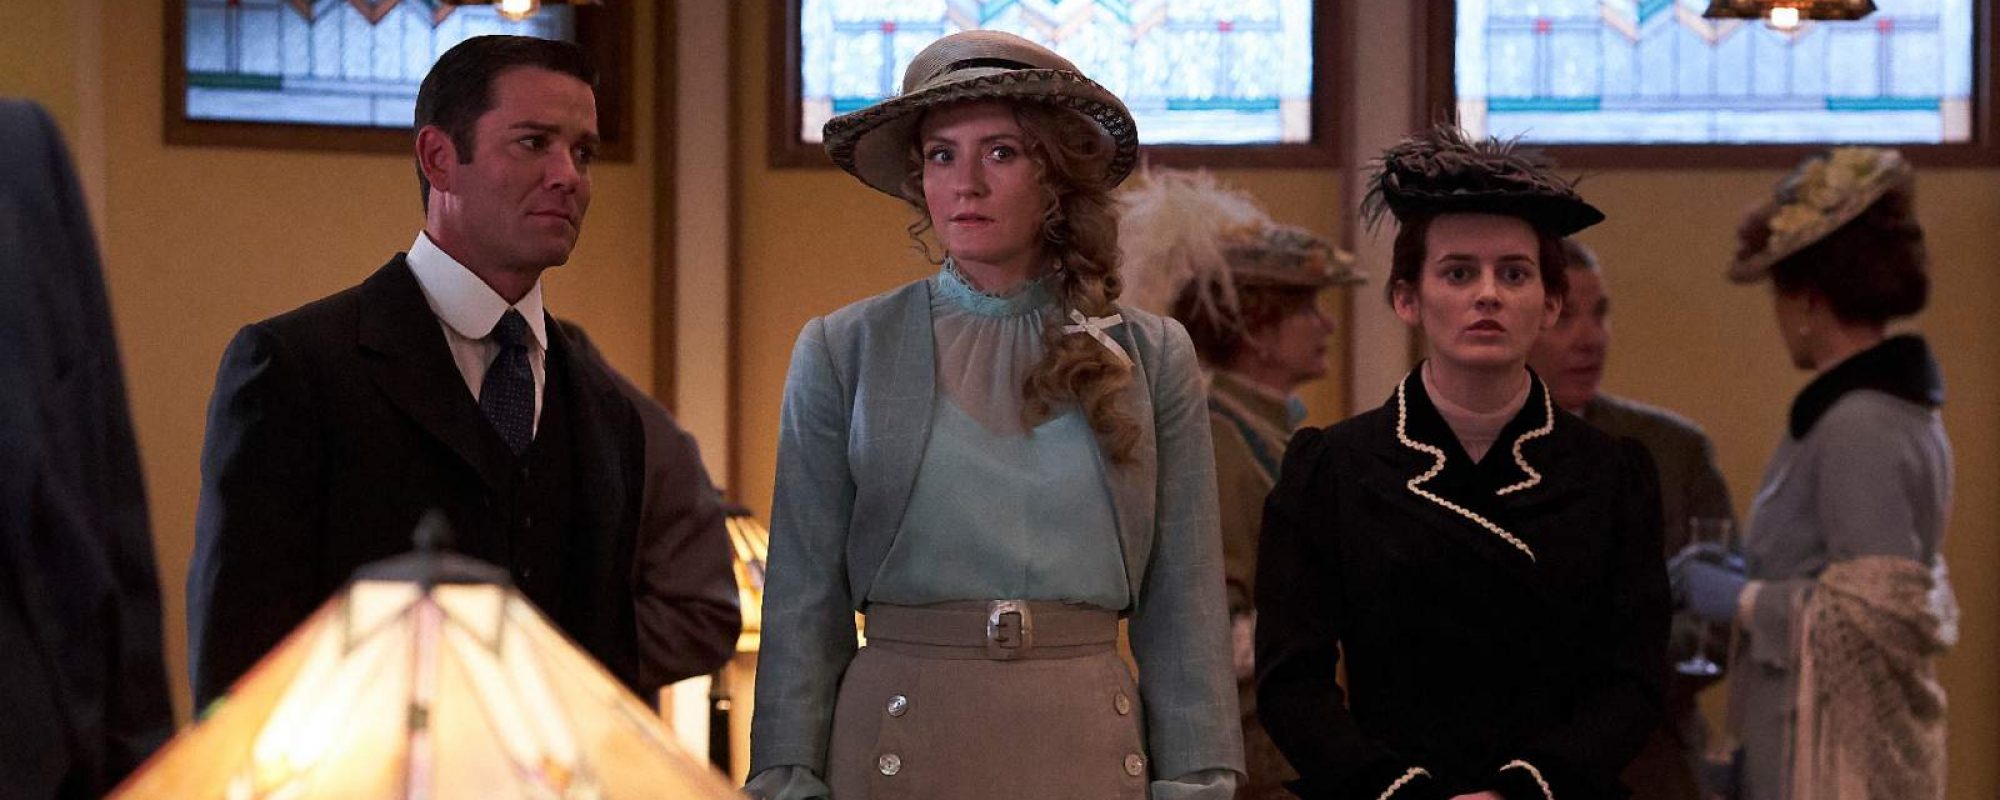 OVATION CELEBRATES THE ART OF MYSTERY WITH THE RETURN OF MURDOCH MYSTERIES AND THE PREMIERE OF FRANKIE DRAKE MYSTERIES IN Q2 2019